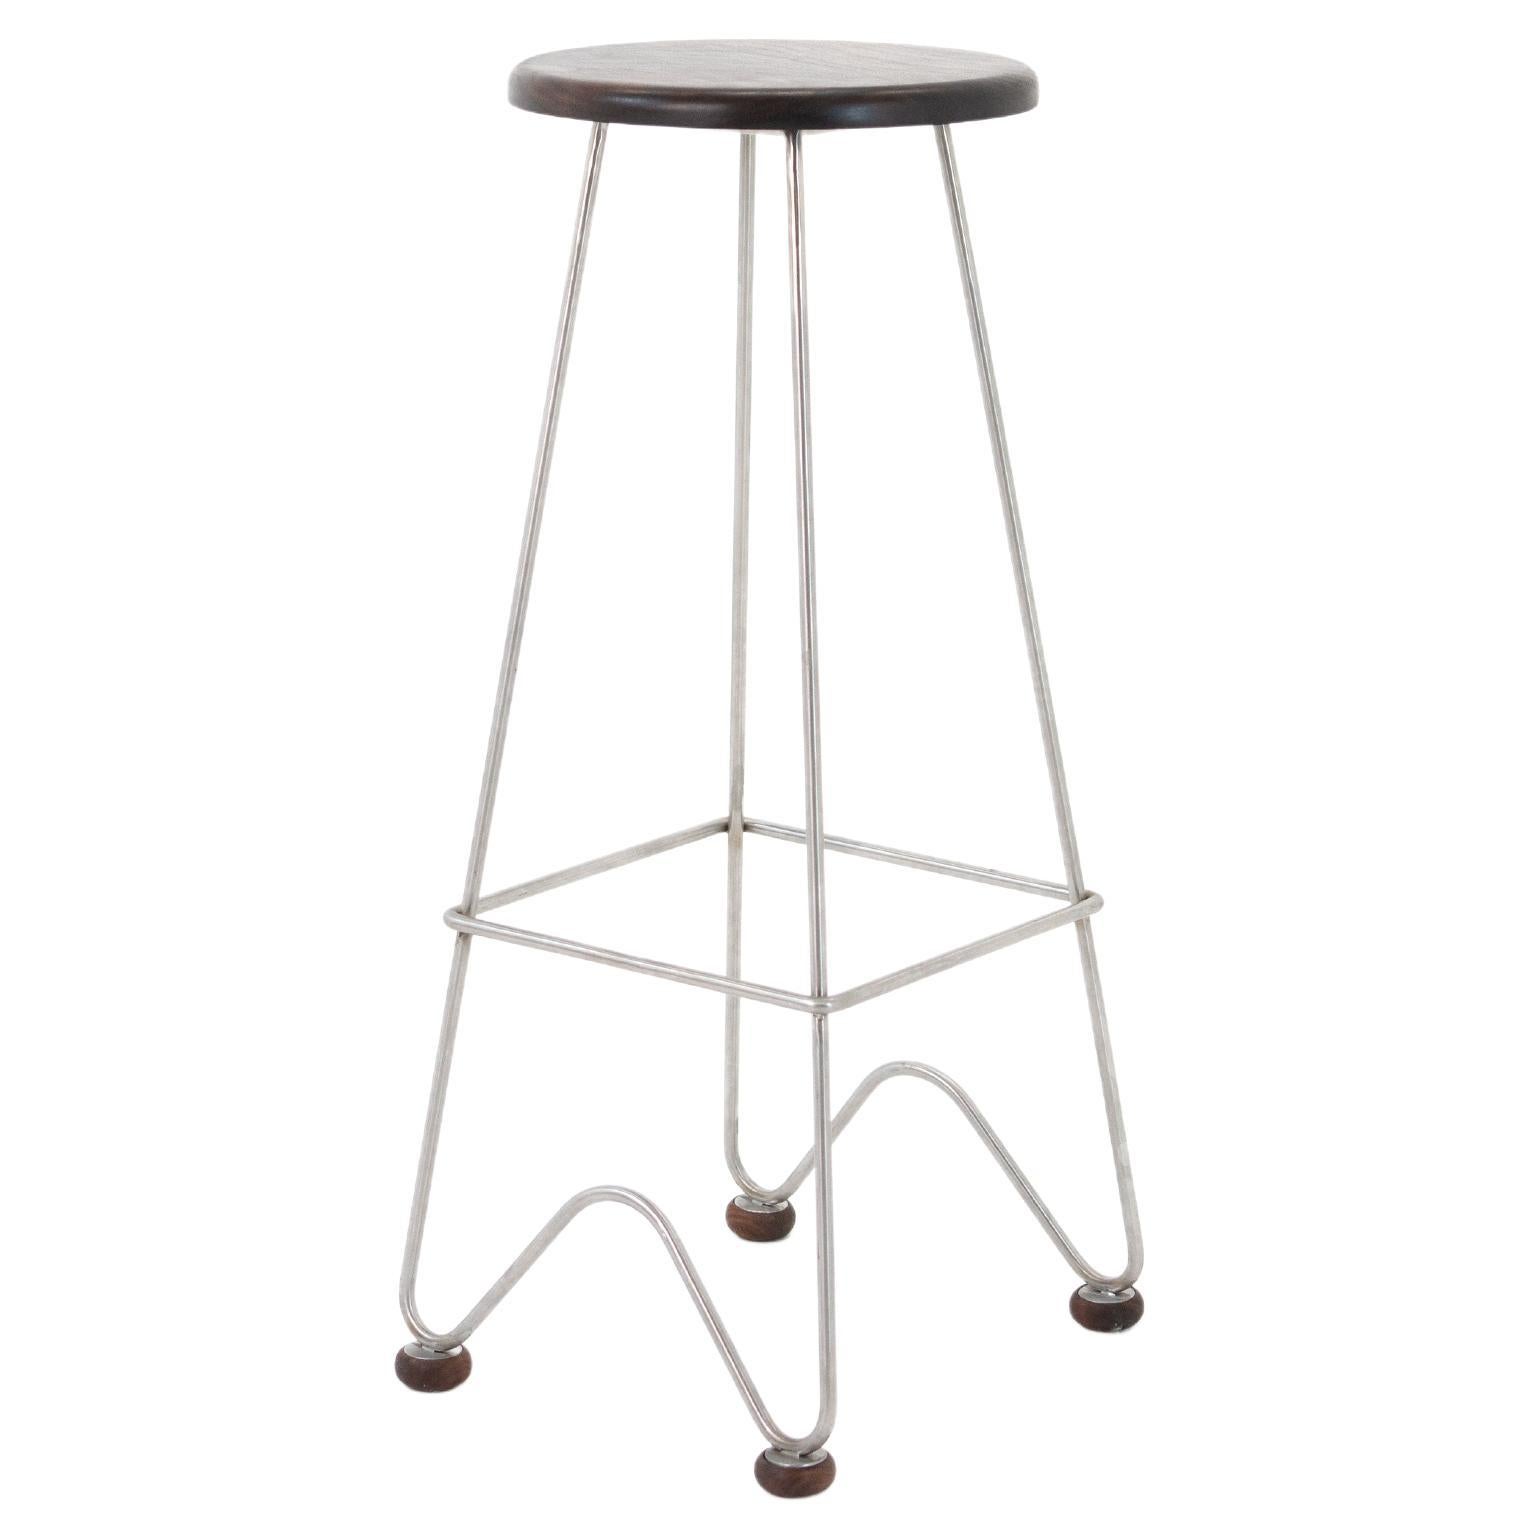 Fish Stool Features a Hand Bent Stainless Steel Frame and Solid Wood Seat For Sale